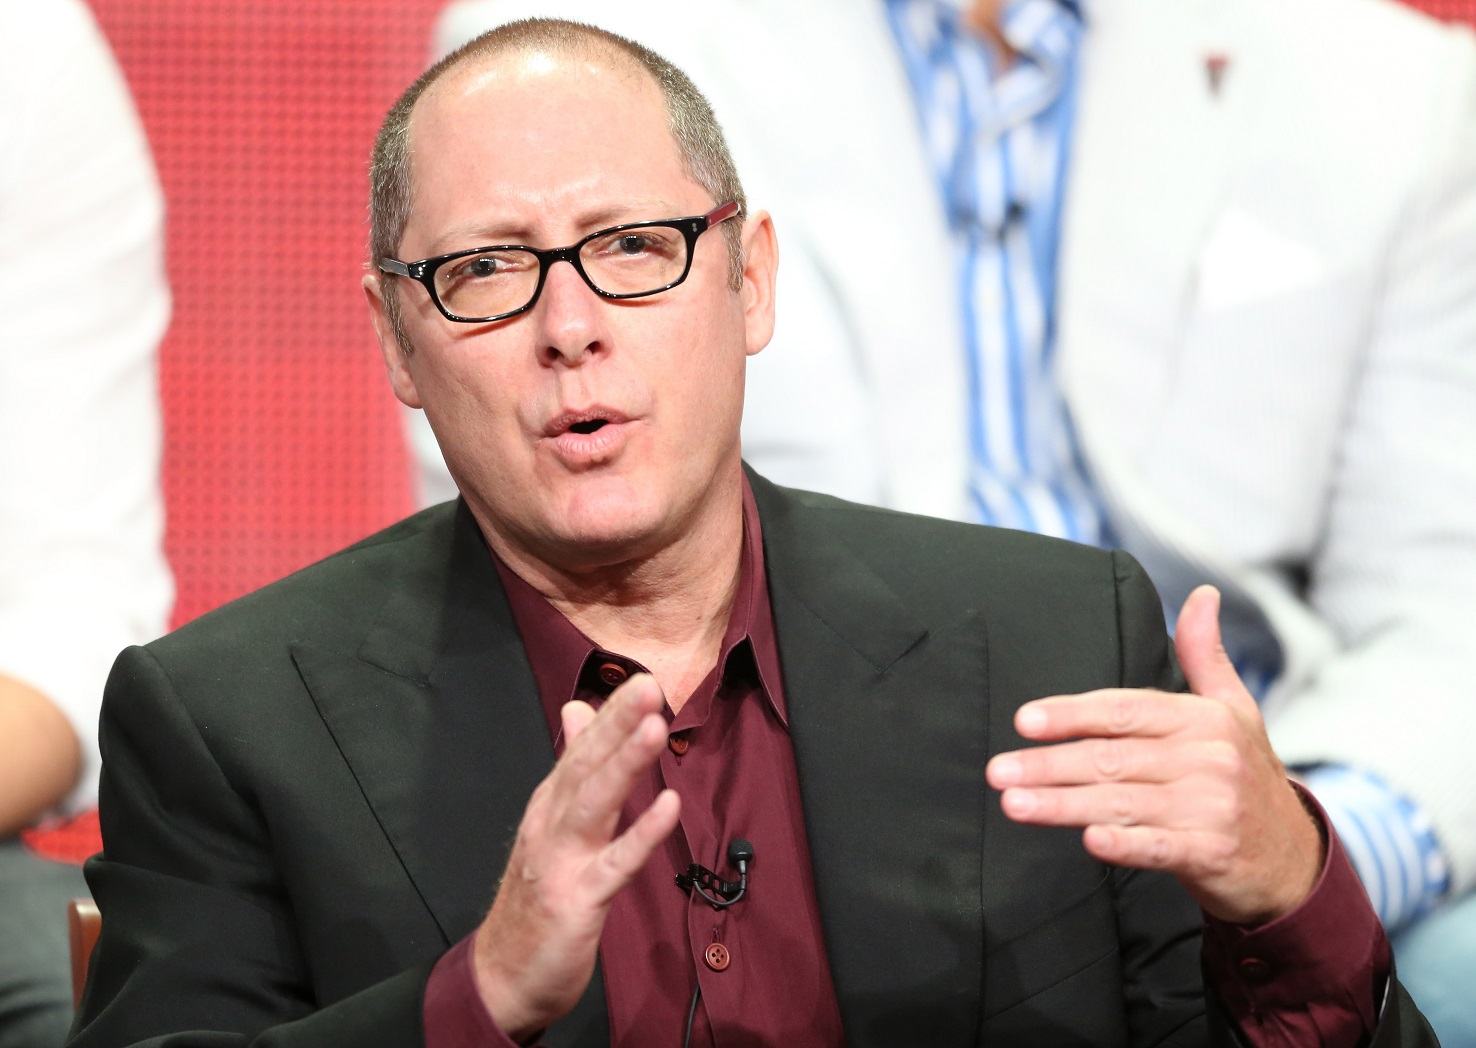 James Spader has a substantial net worth that could grow larger thanks to his producer title on 'The Blacklist.'